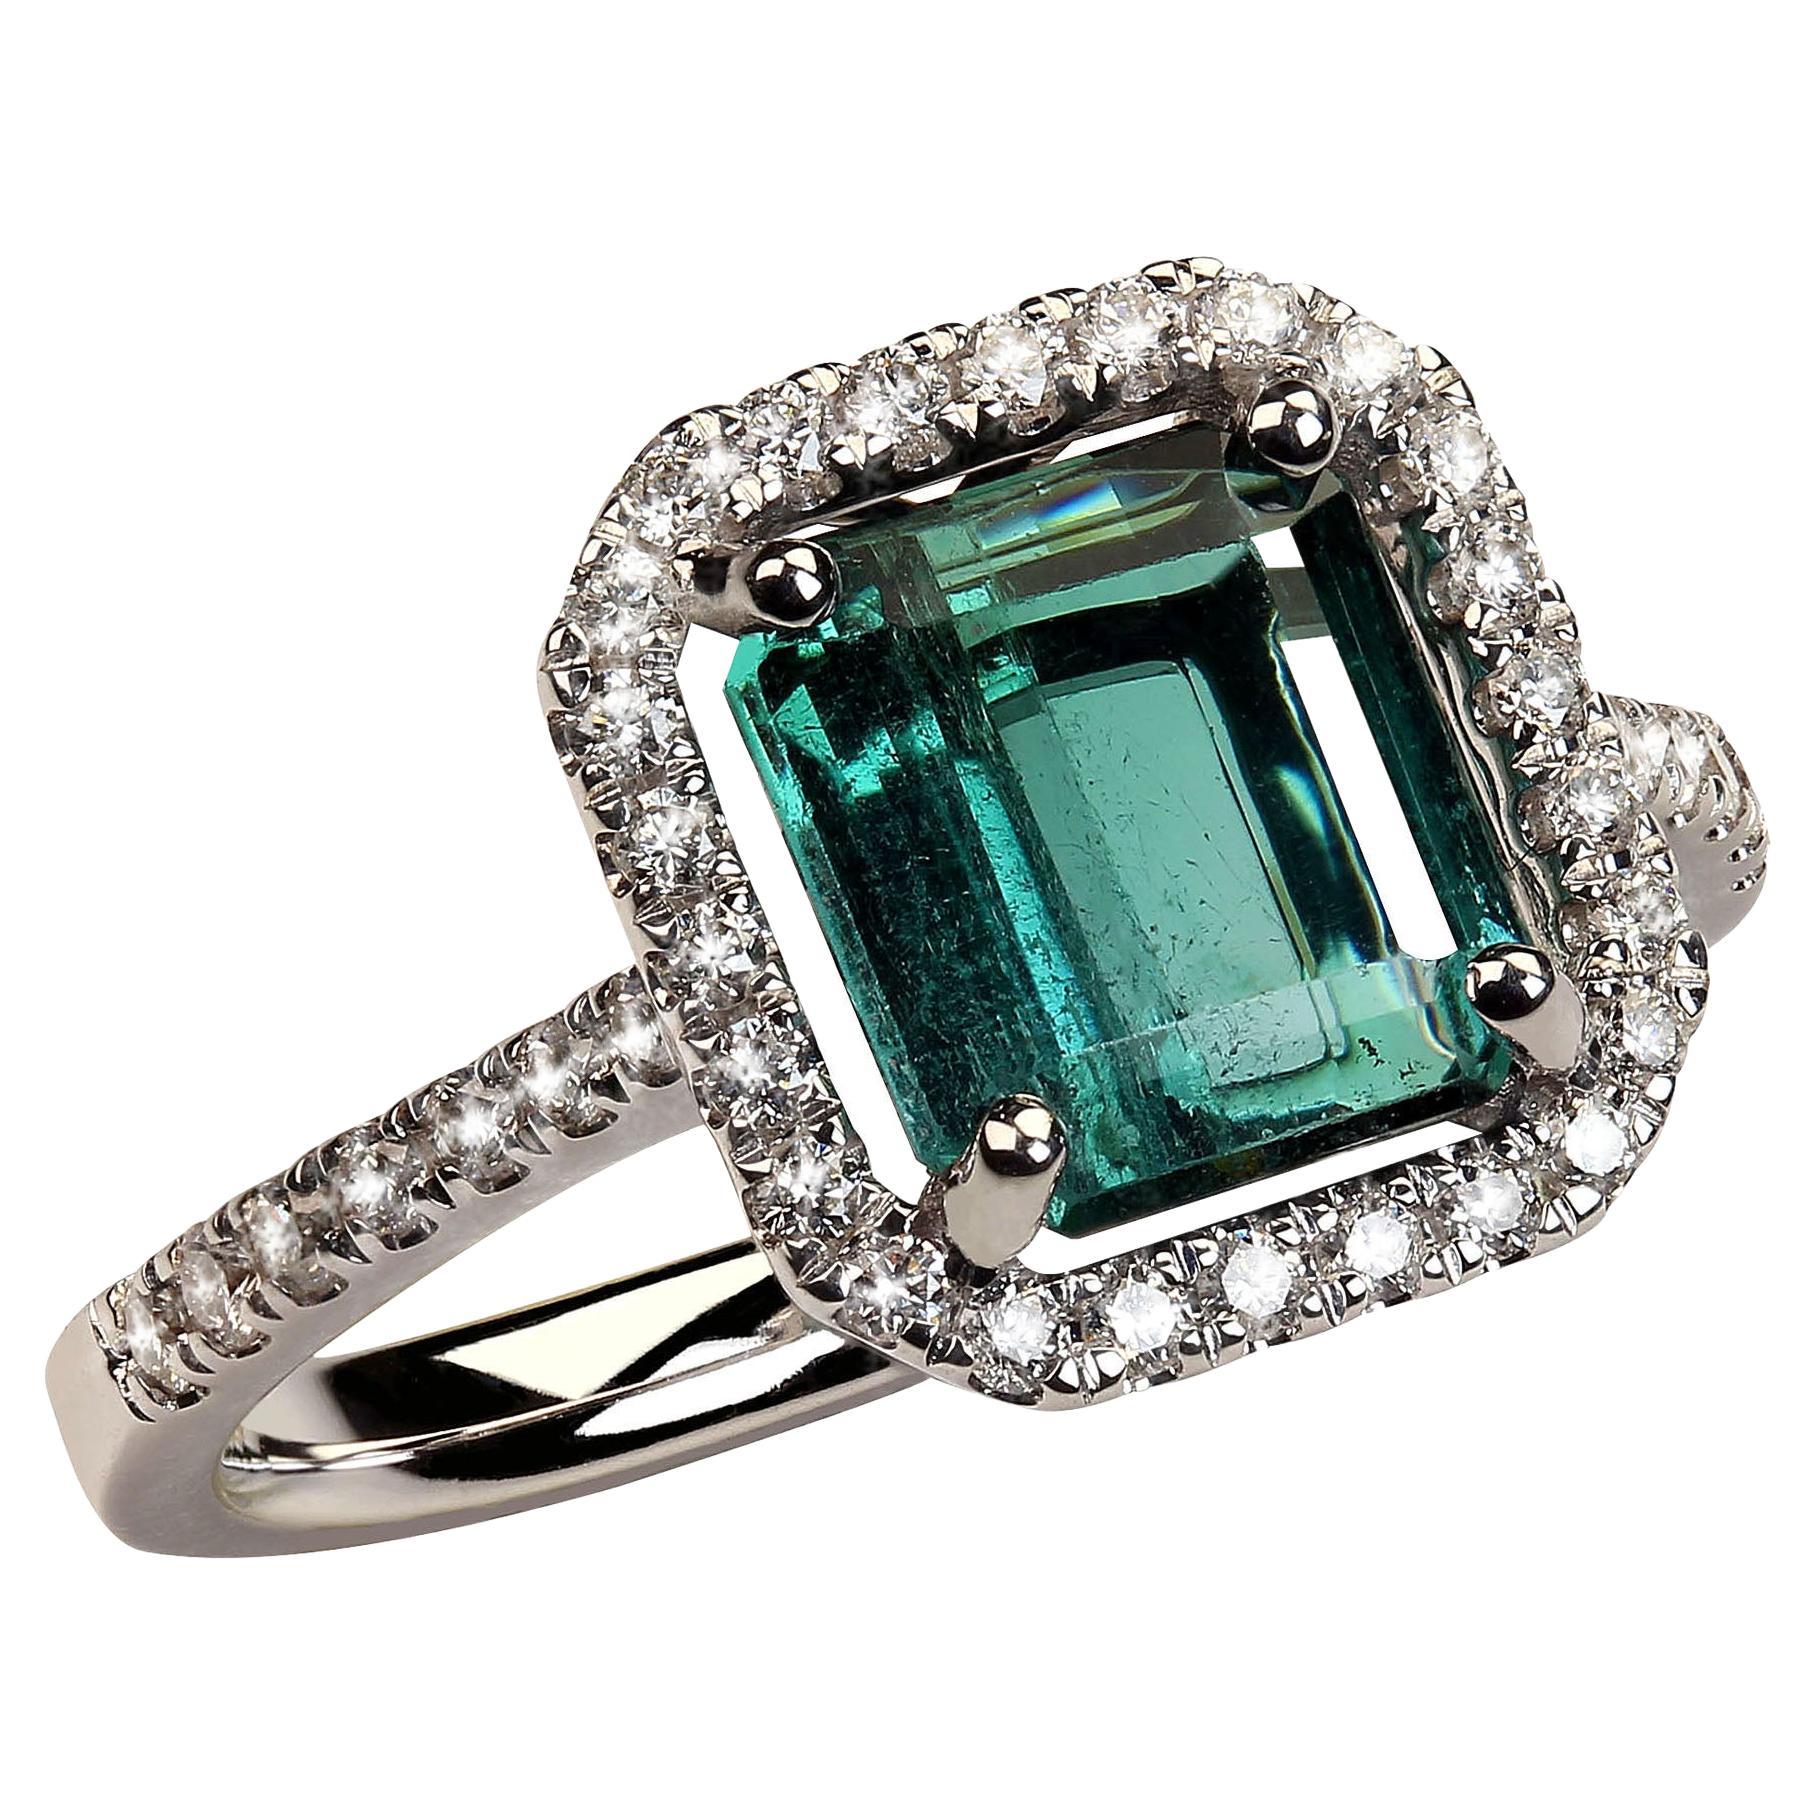 Lovely Brazilian green Tourmaline and Diamond Dinner Ring.  This gleaming green Tourmaline is enhanced with a halo of  diamonds with more diamonds gracing the shank. The emerald cut bluish green Tourmaline is 8.25 x 7.5 MM and est 2 carats.  The